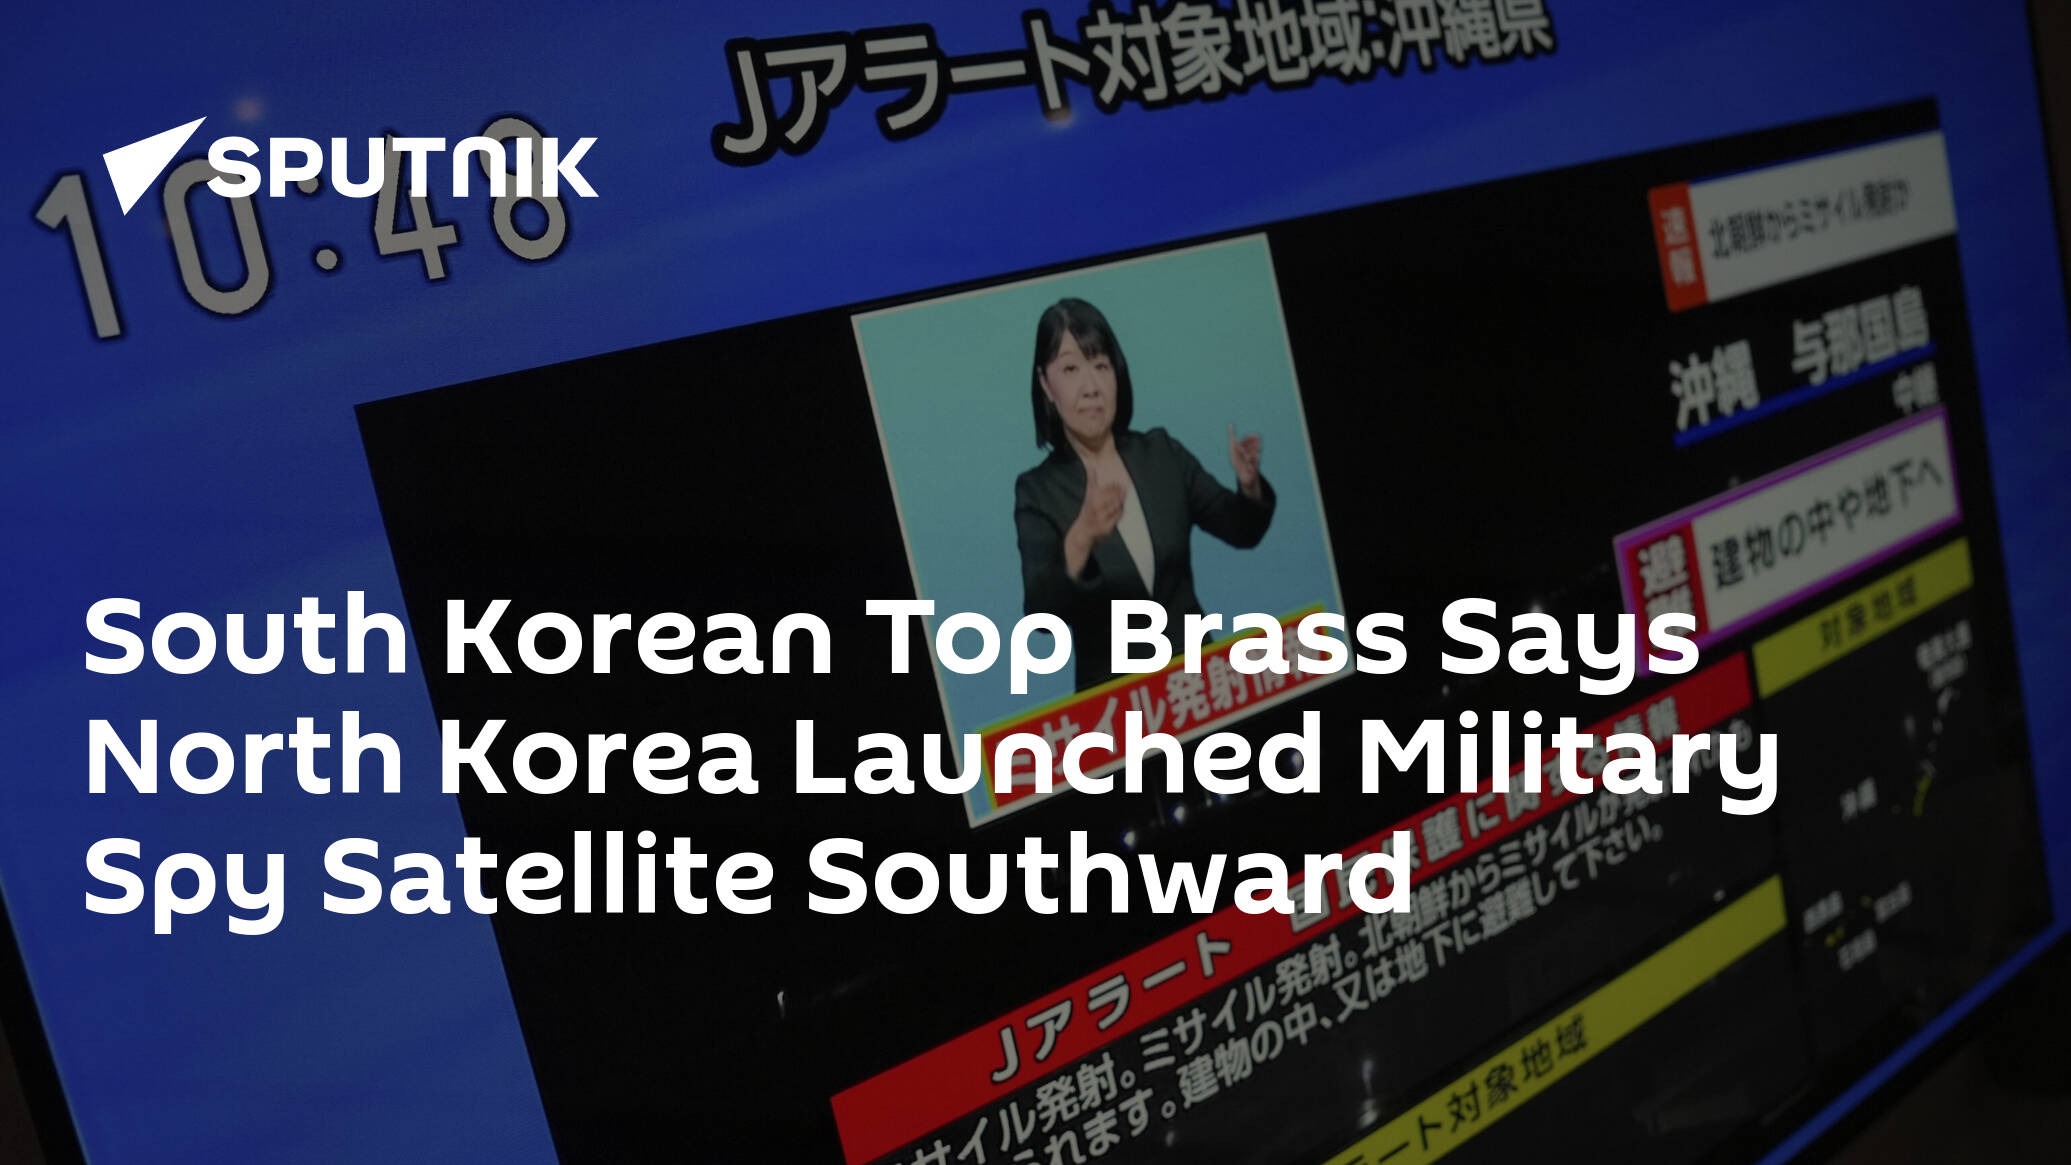 South Korean Top Brass Says North Korea Launched Military Spy Satellite Southward